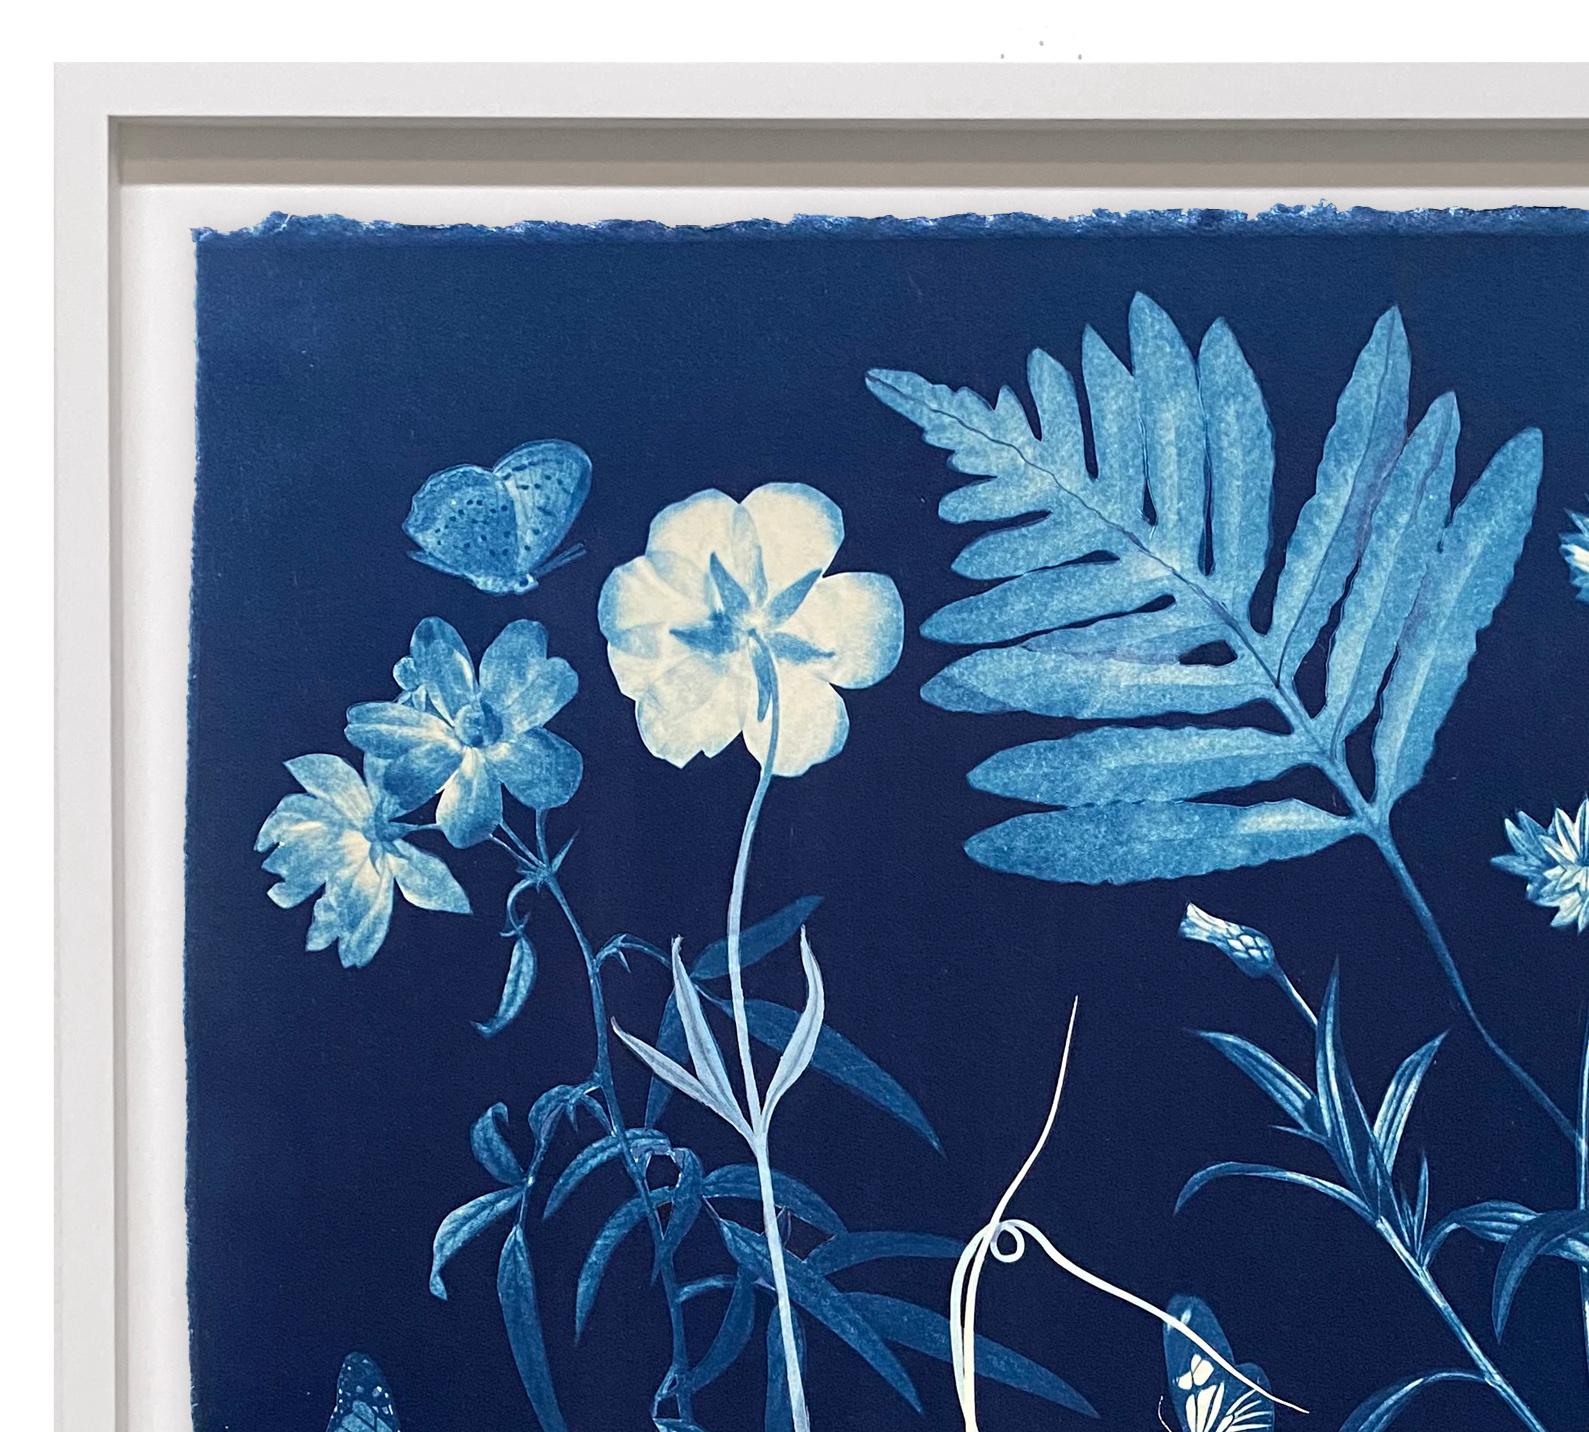 In this vertical work in watercolor, gouache, and cyanotype on cotton Arches paper, leaves and meticulously detailed flowers, including roses and snowdrops are depicted in white and shades of pale blue against a deep, indigo blue background, while